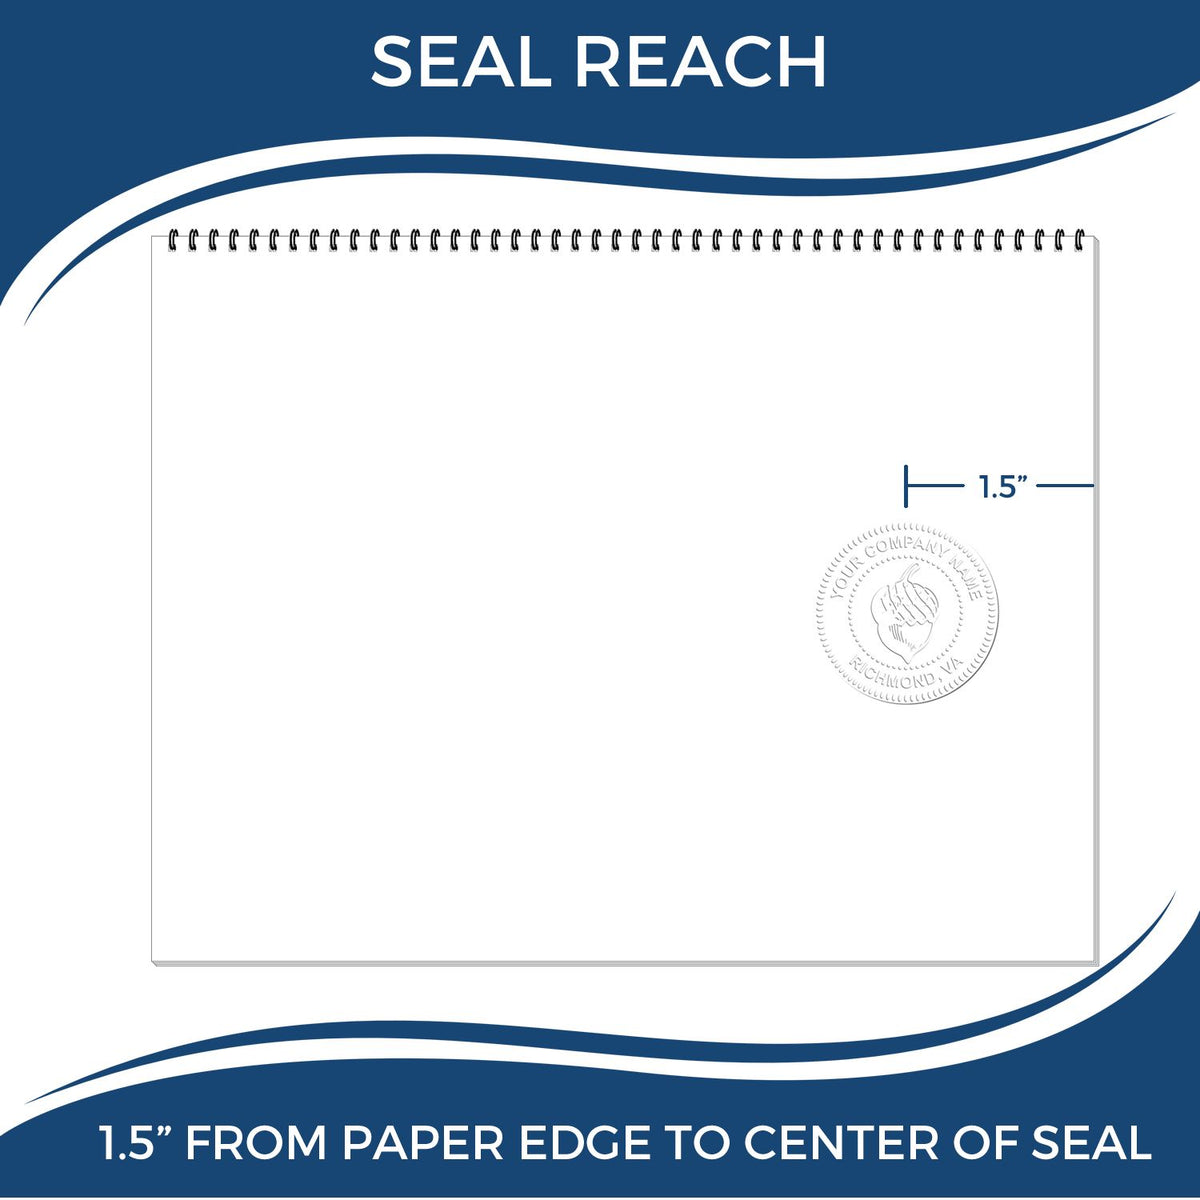 An infographic showing the seal reach which is represented by a ruler and a miniature seal image of the Washington Engineer Desk Seal